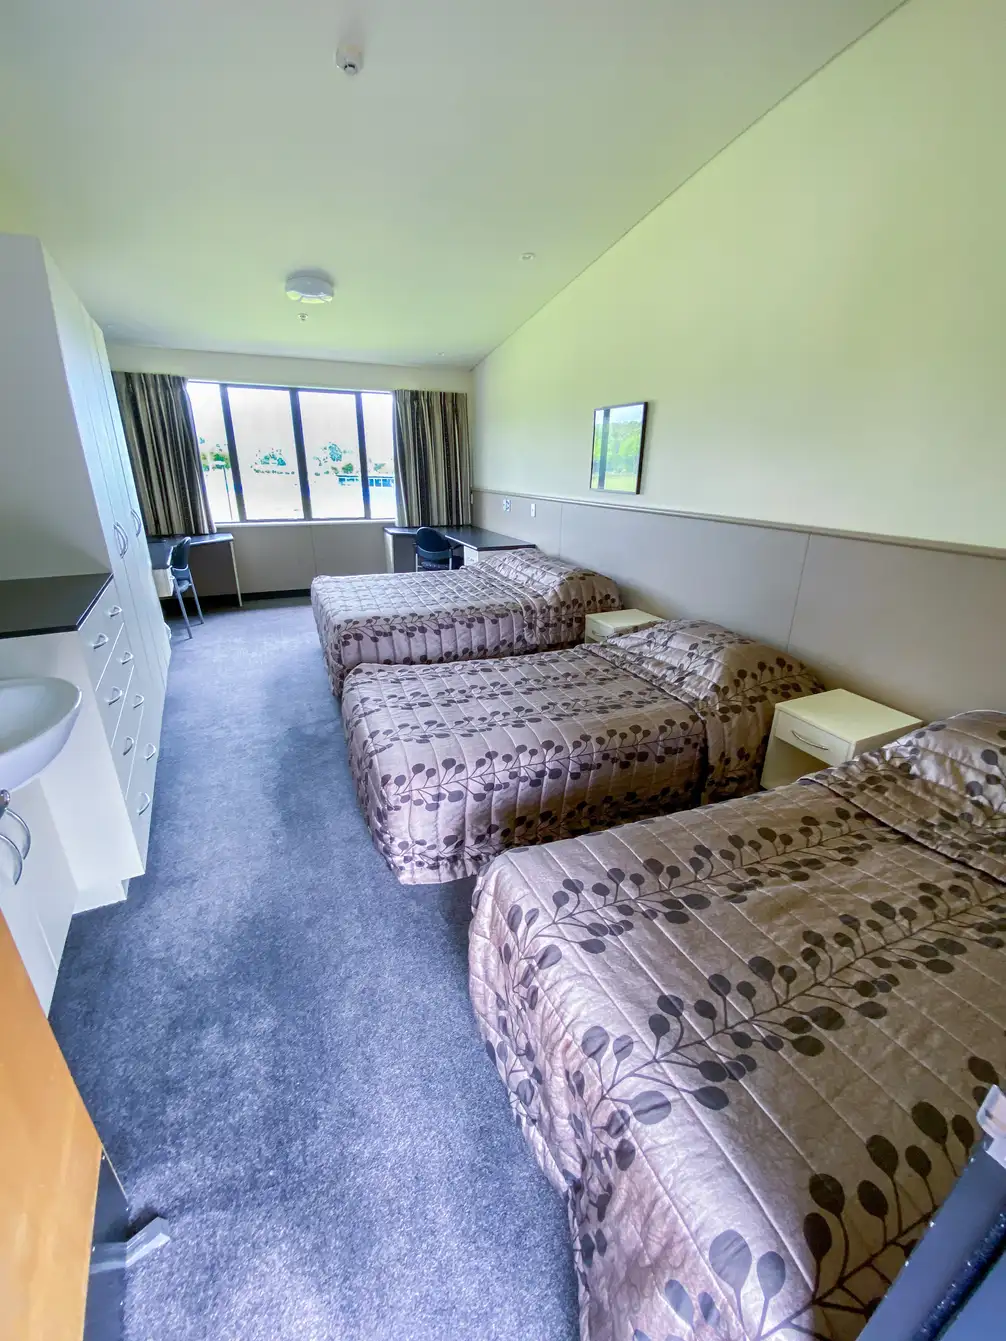 Accommodation at the Massey Sport and Event Centre - Massey University